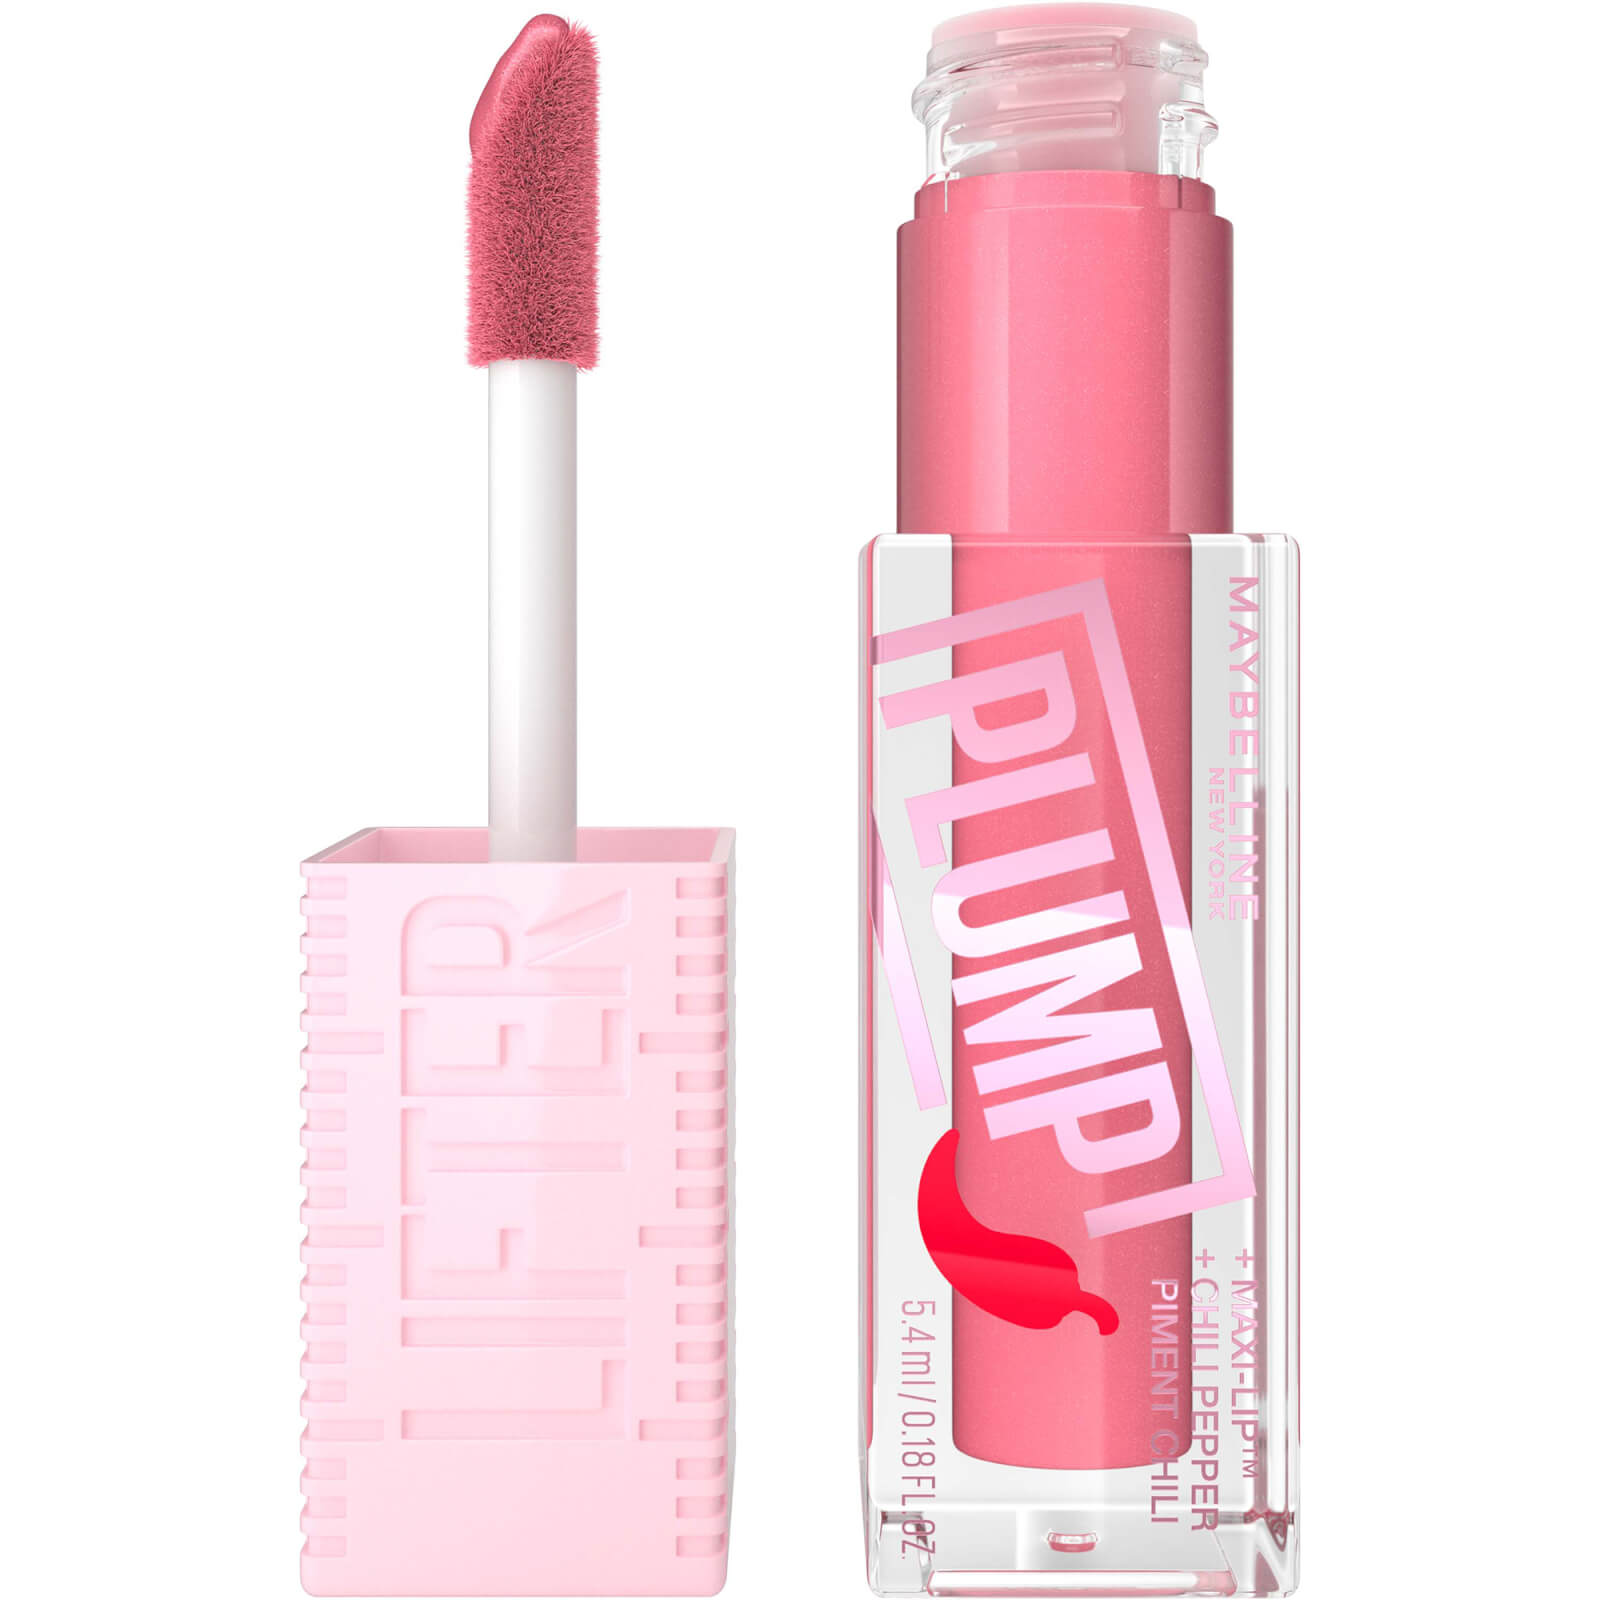 maybelline lifter gloss plumping lip gloss lasting hydration formula with hyaluronic acid and chilli pepper (various shades) - blush blaze